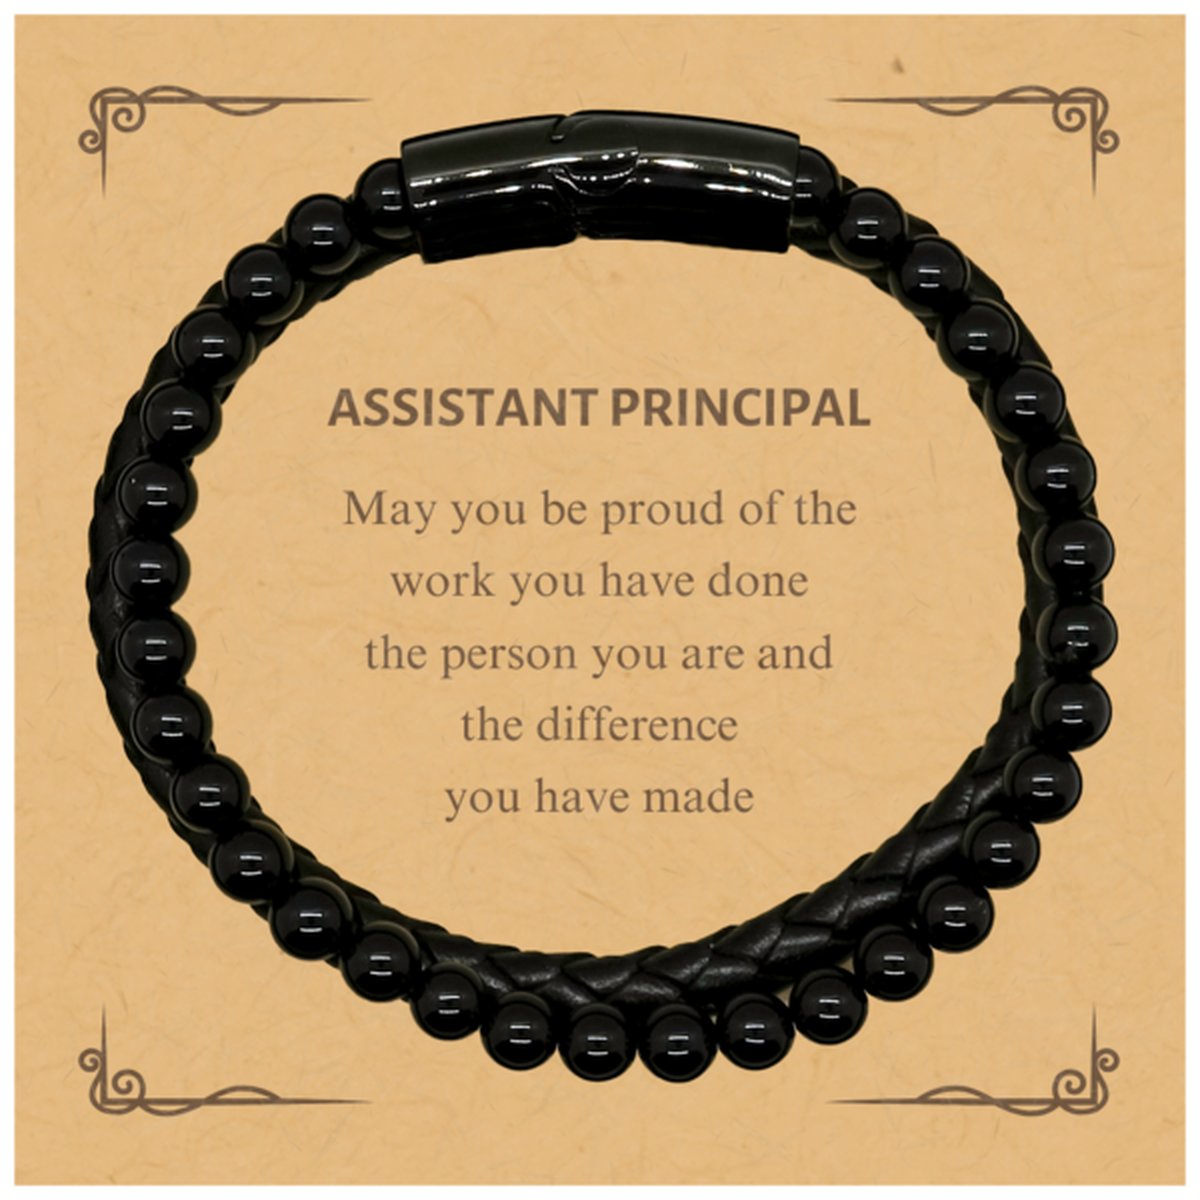 Assistant Principal May you be proud of the work you have done, Retirement Assistant Principal Stone Leather Bracelets for Colleague Appreciation Gifts Amazing for Assistant Principal